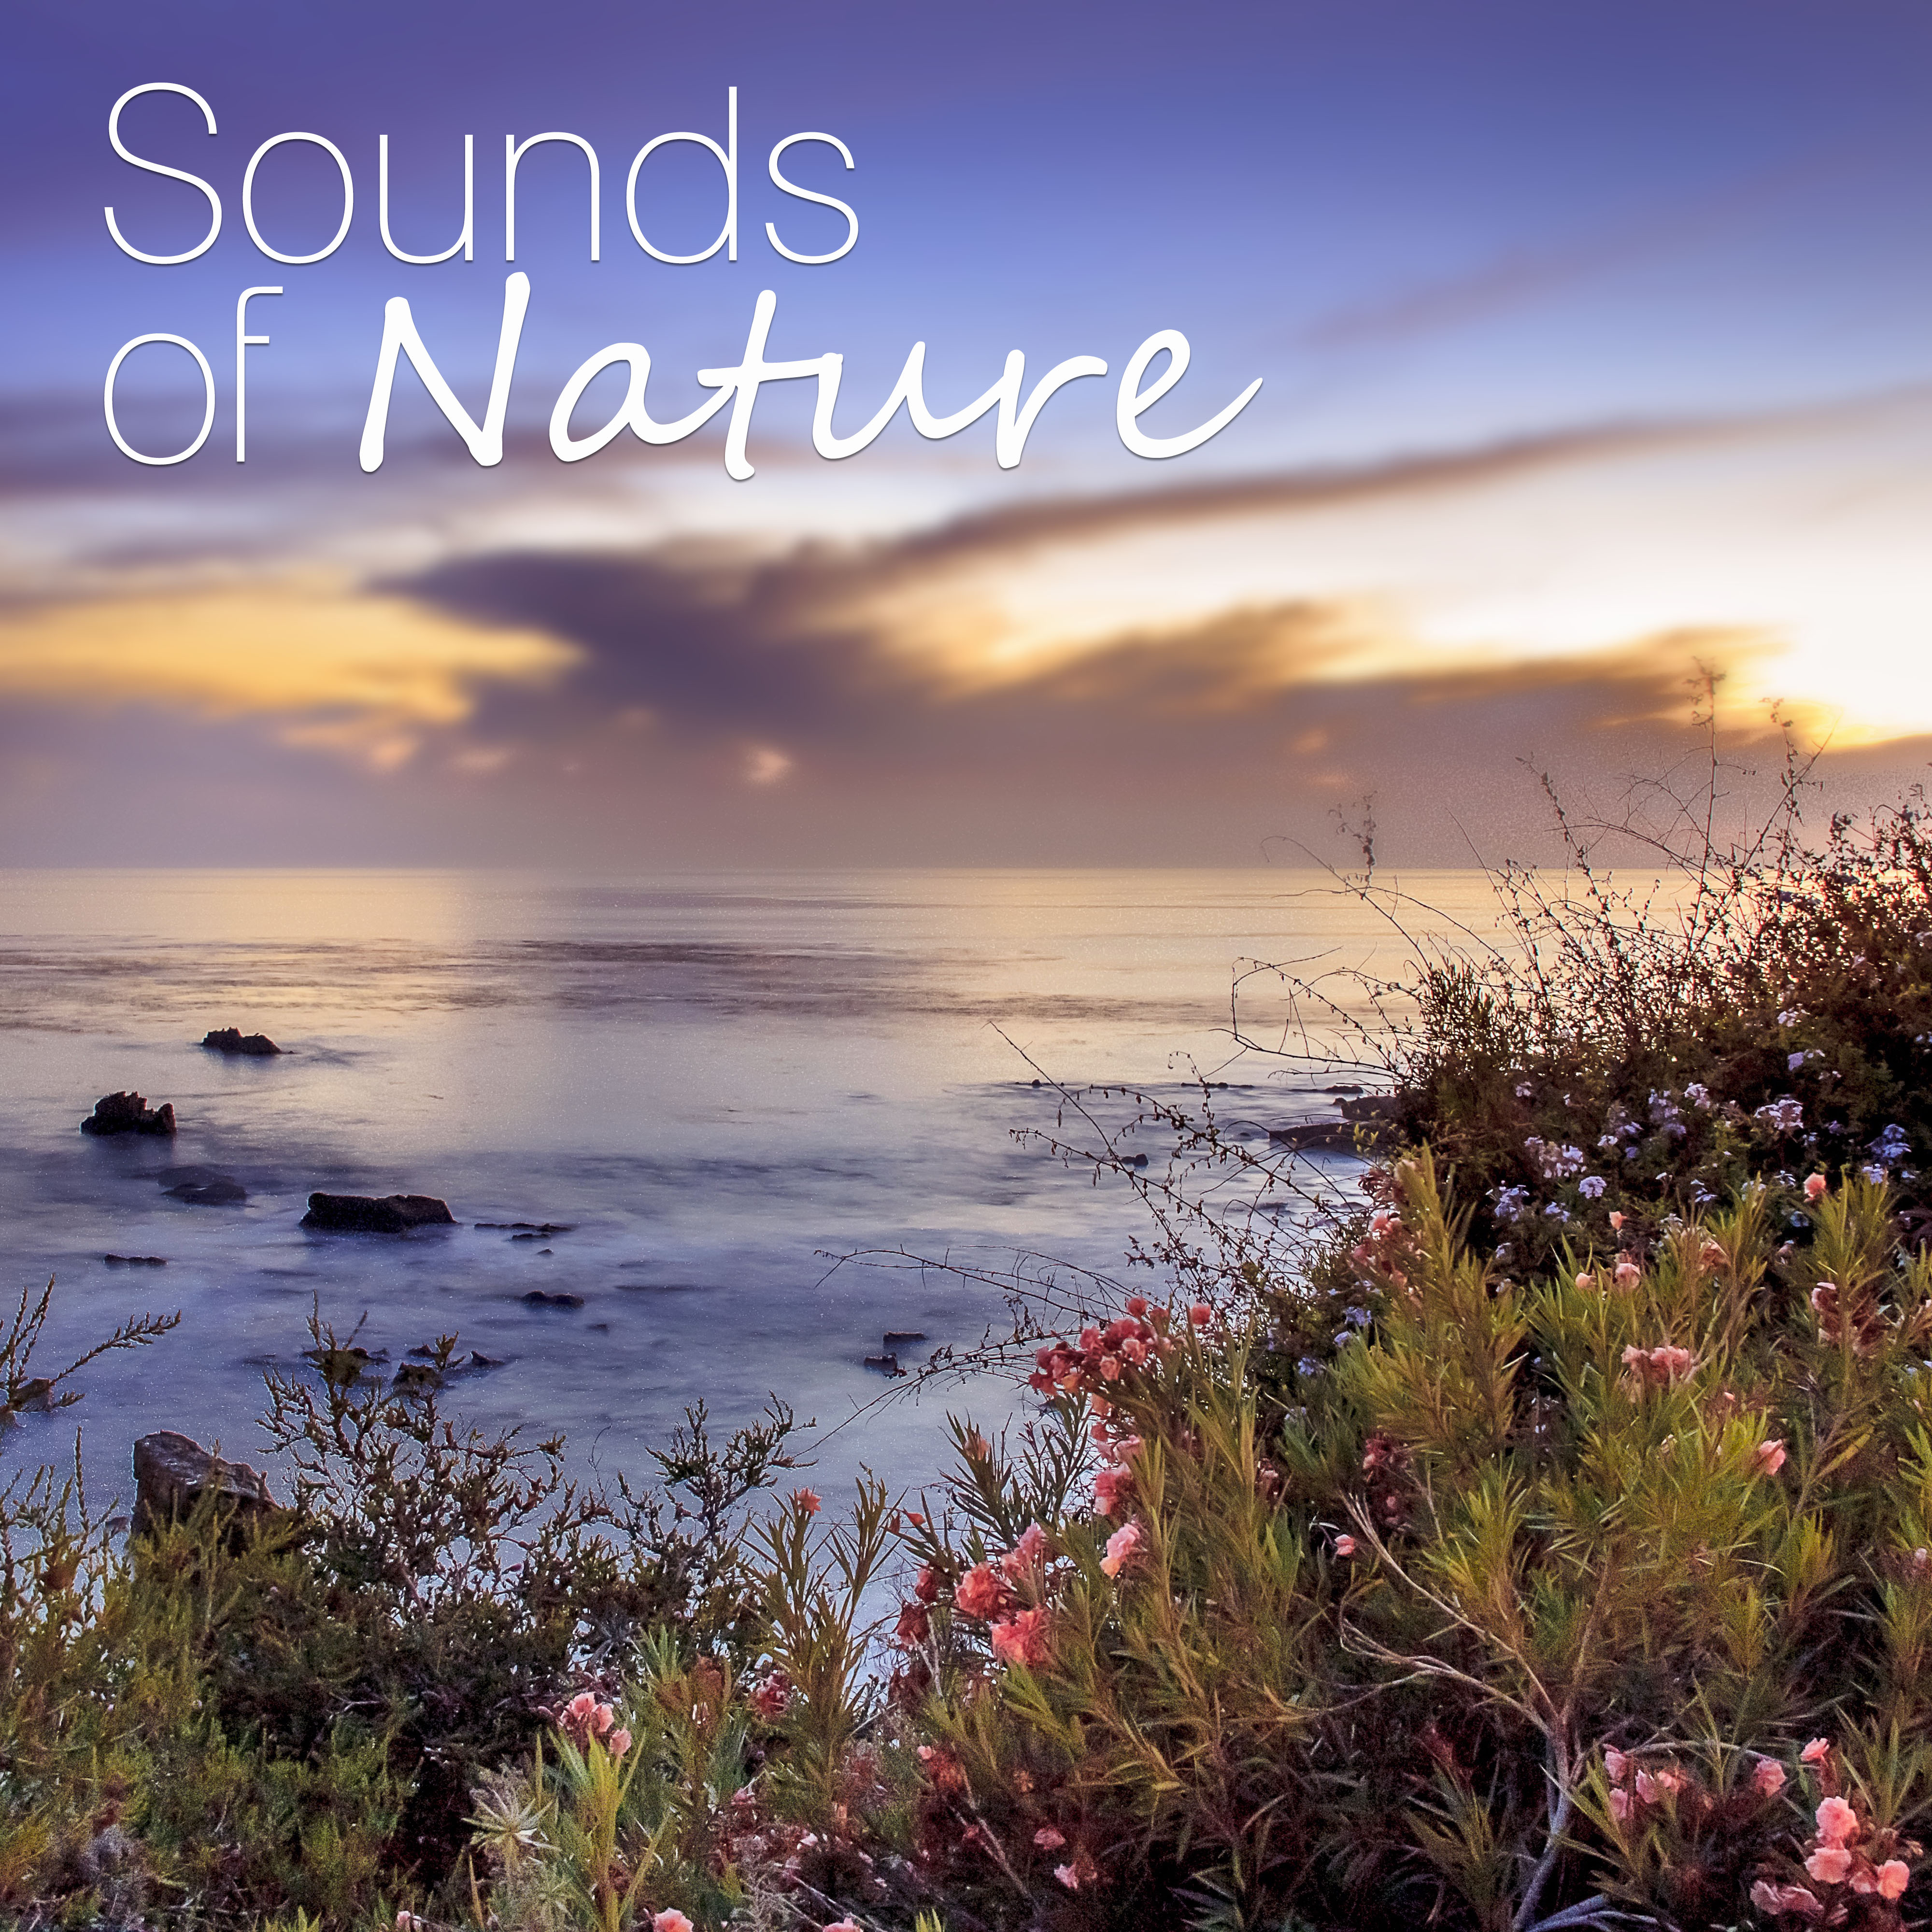 Sounds of Nature  Ambient Nature Sounds for Relax, Meditation, Sleep